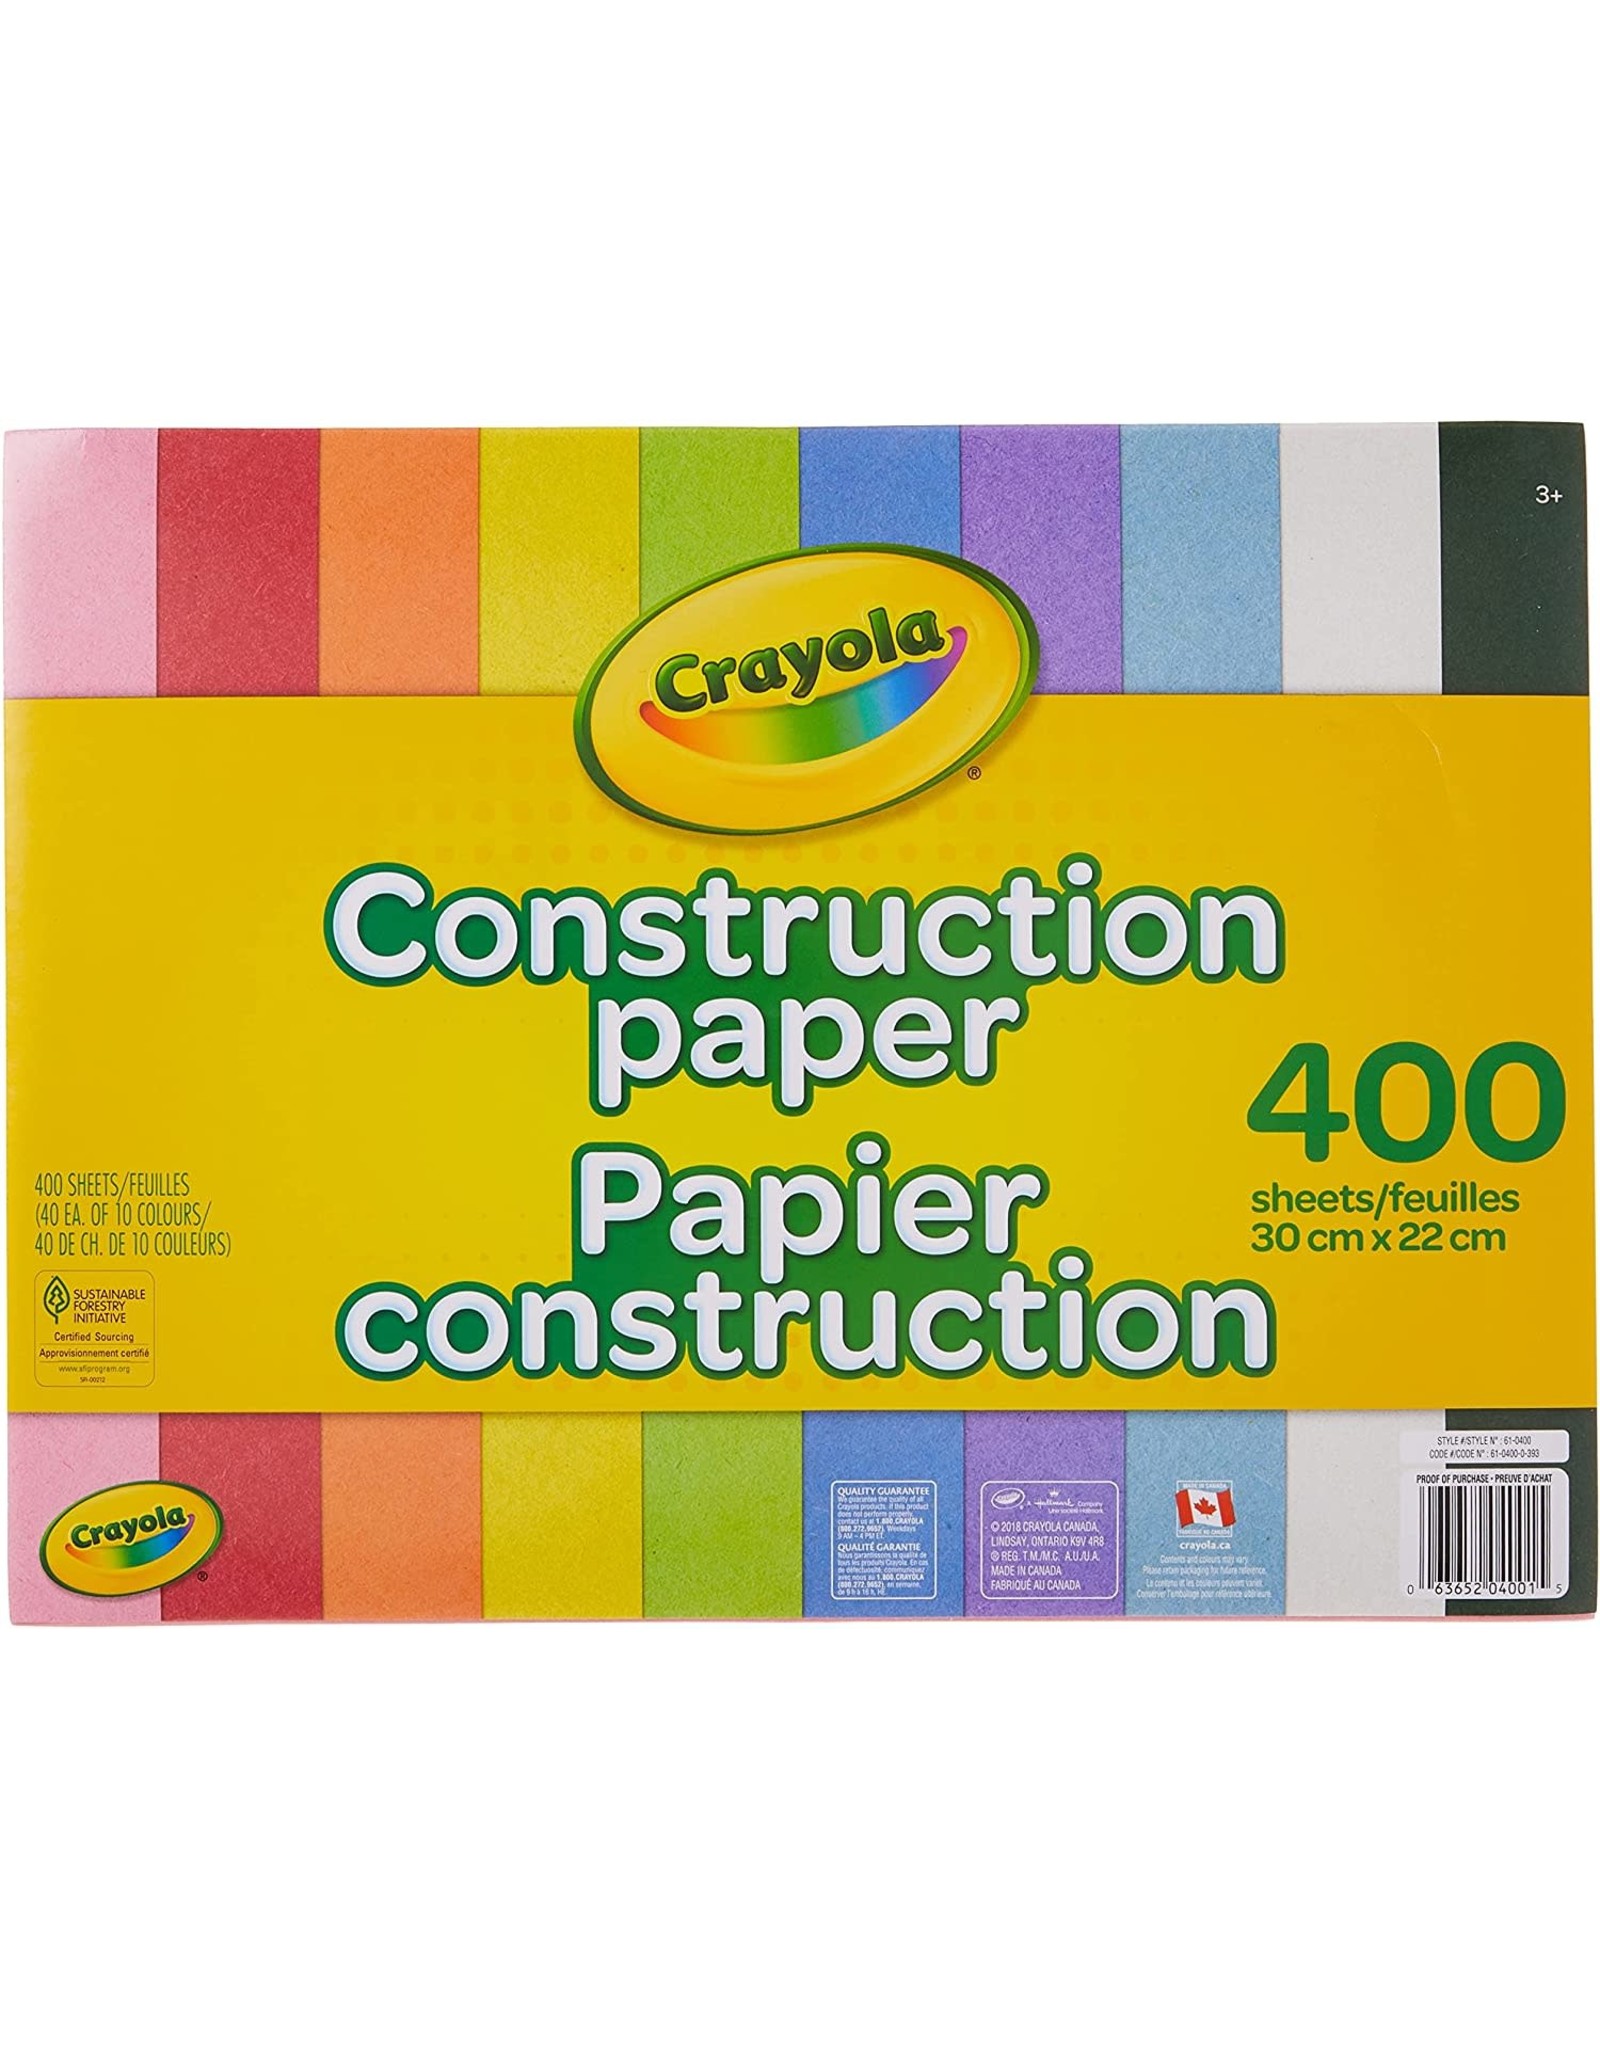 Crayola Construction Paper Pad - 400 Pages